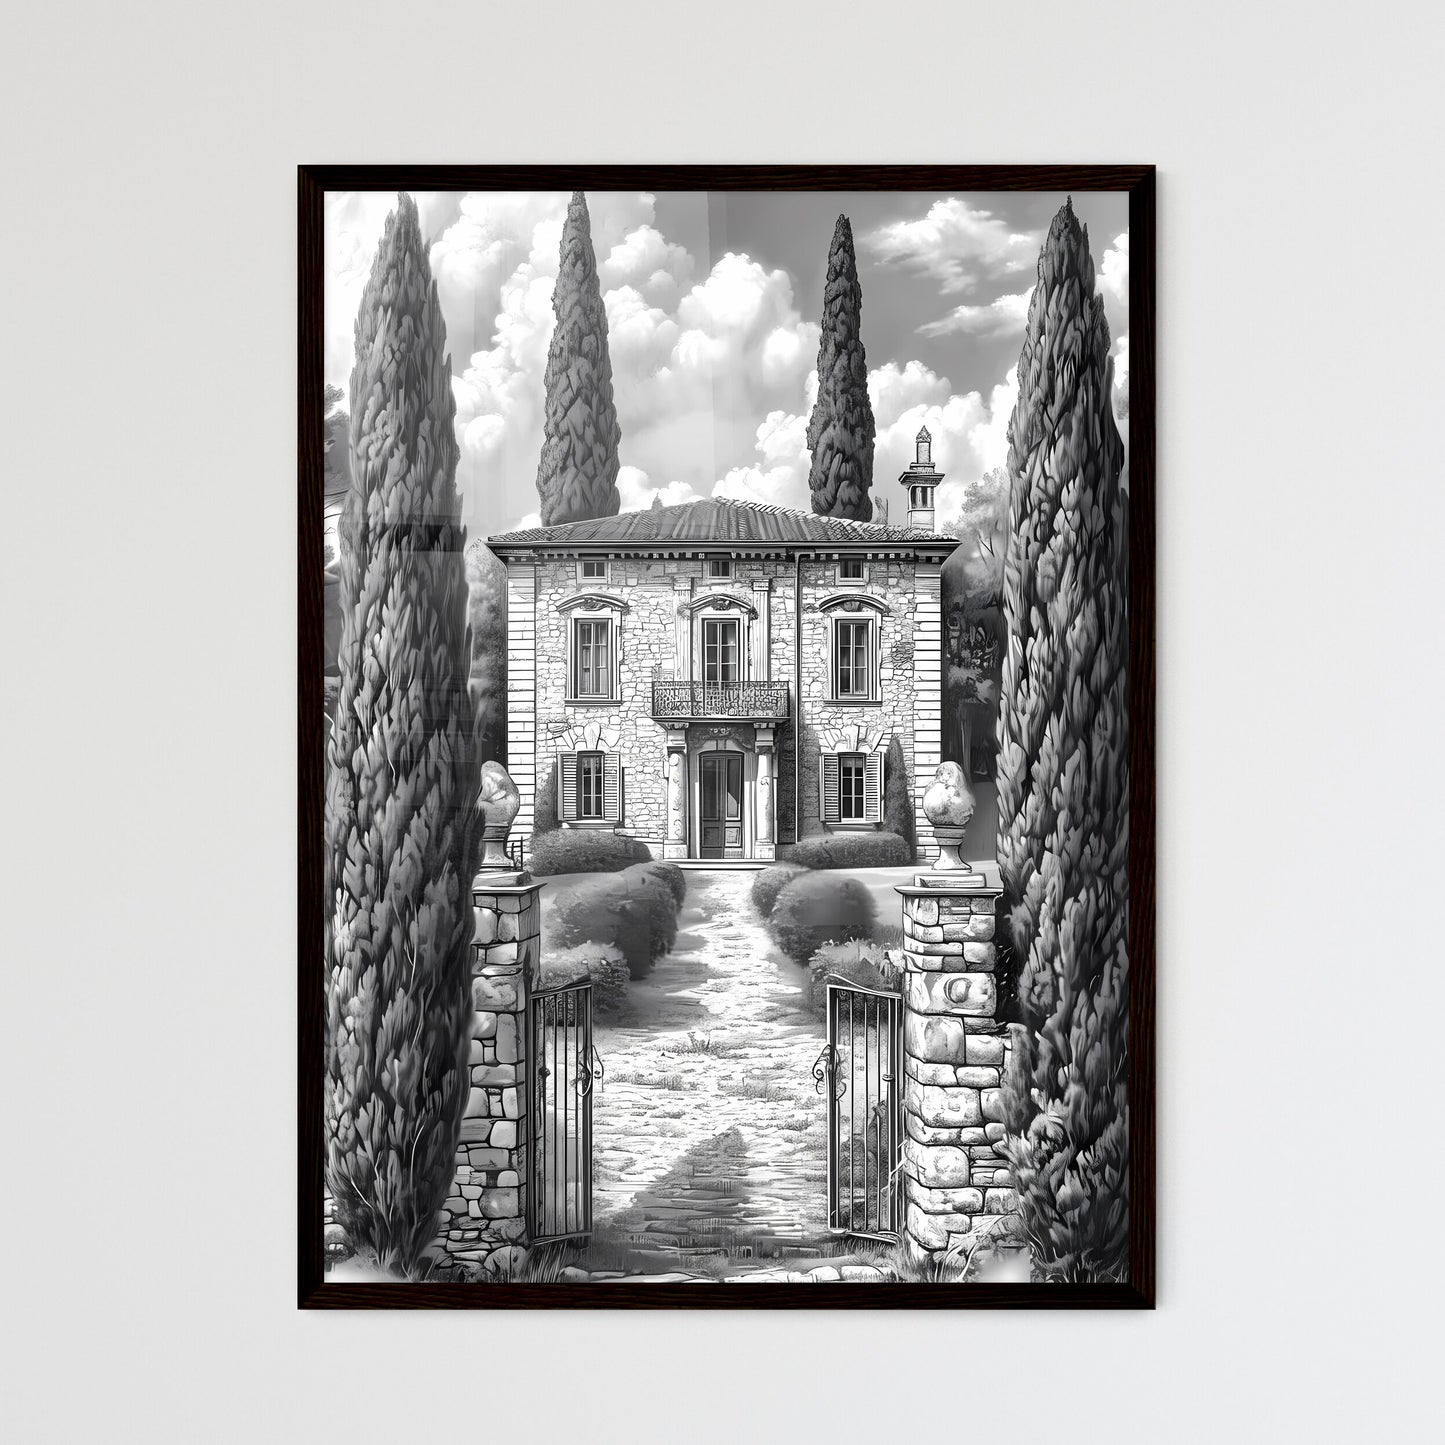 A French Chateau winery - Art print of a drawing of a house with trees and a gate Default Title